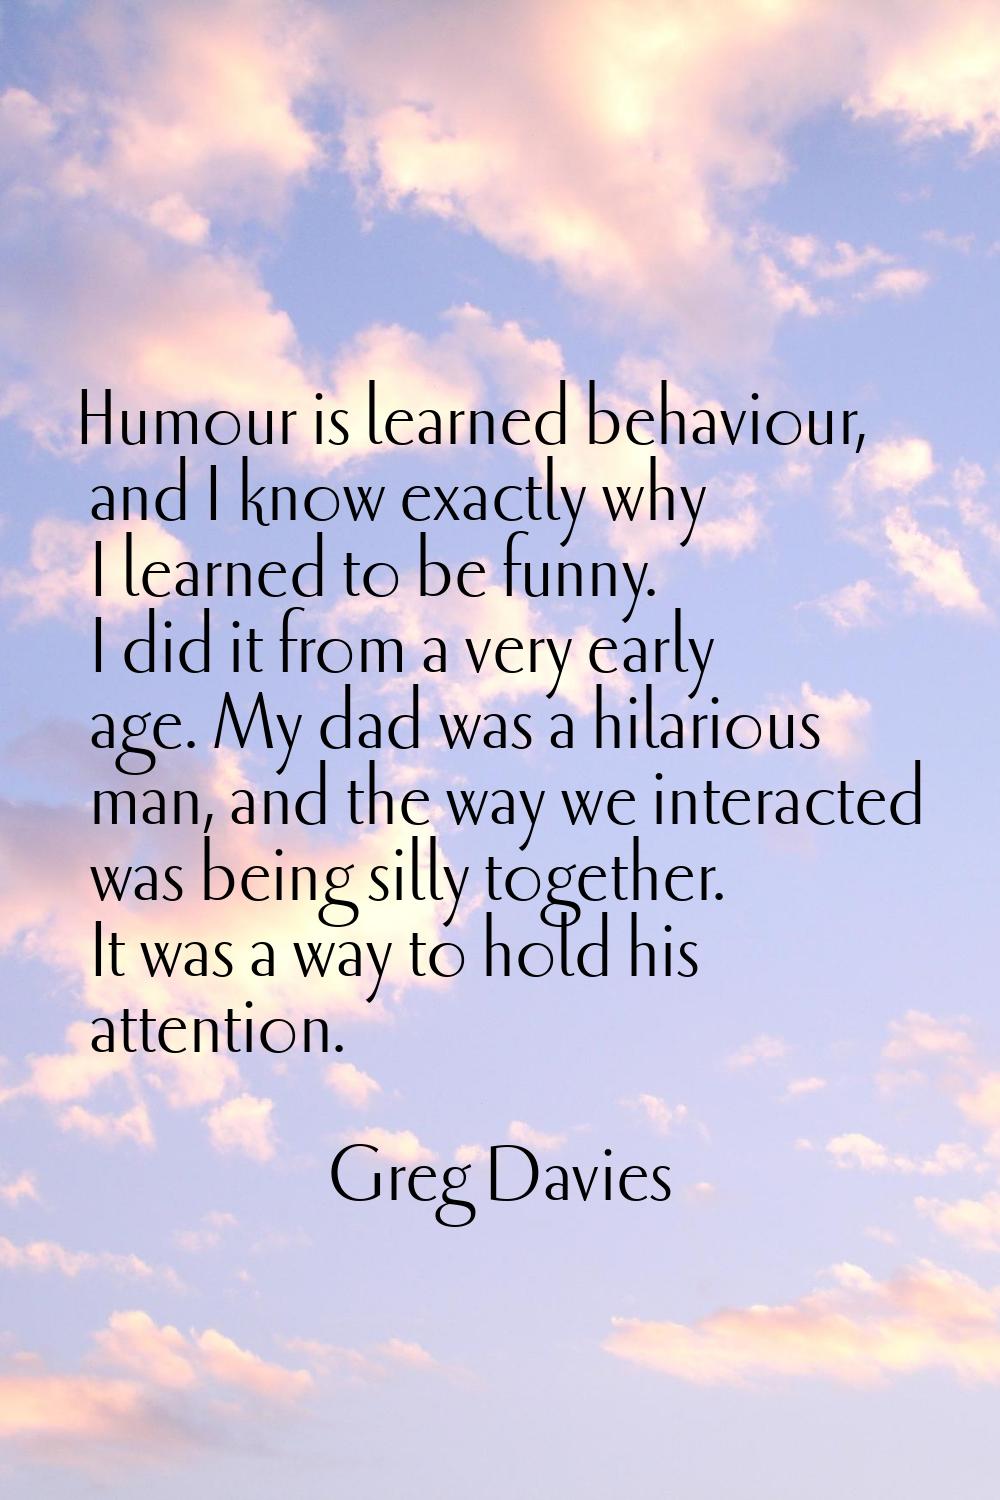 Humour is learned behaviour, and I know exactly why I learned to be funny. I did it from a very ear